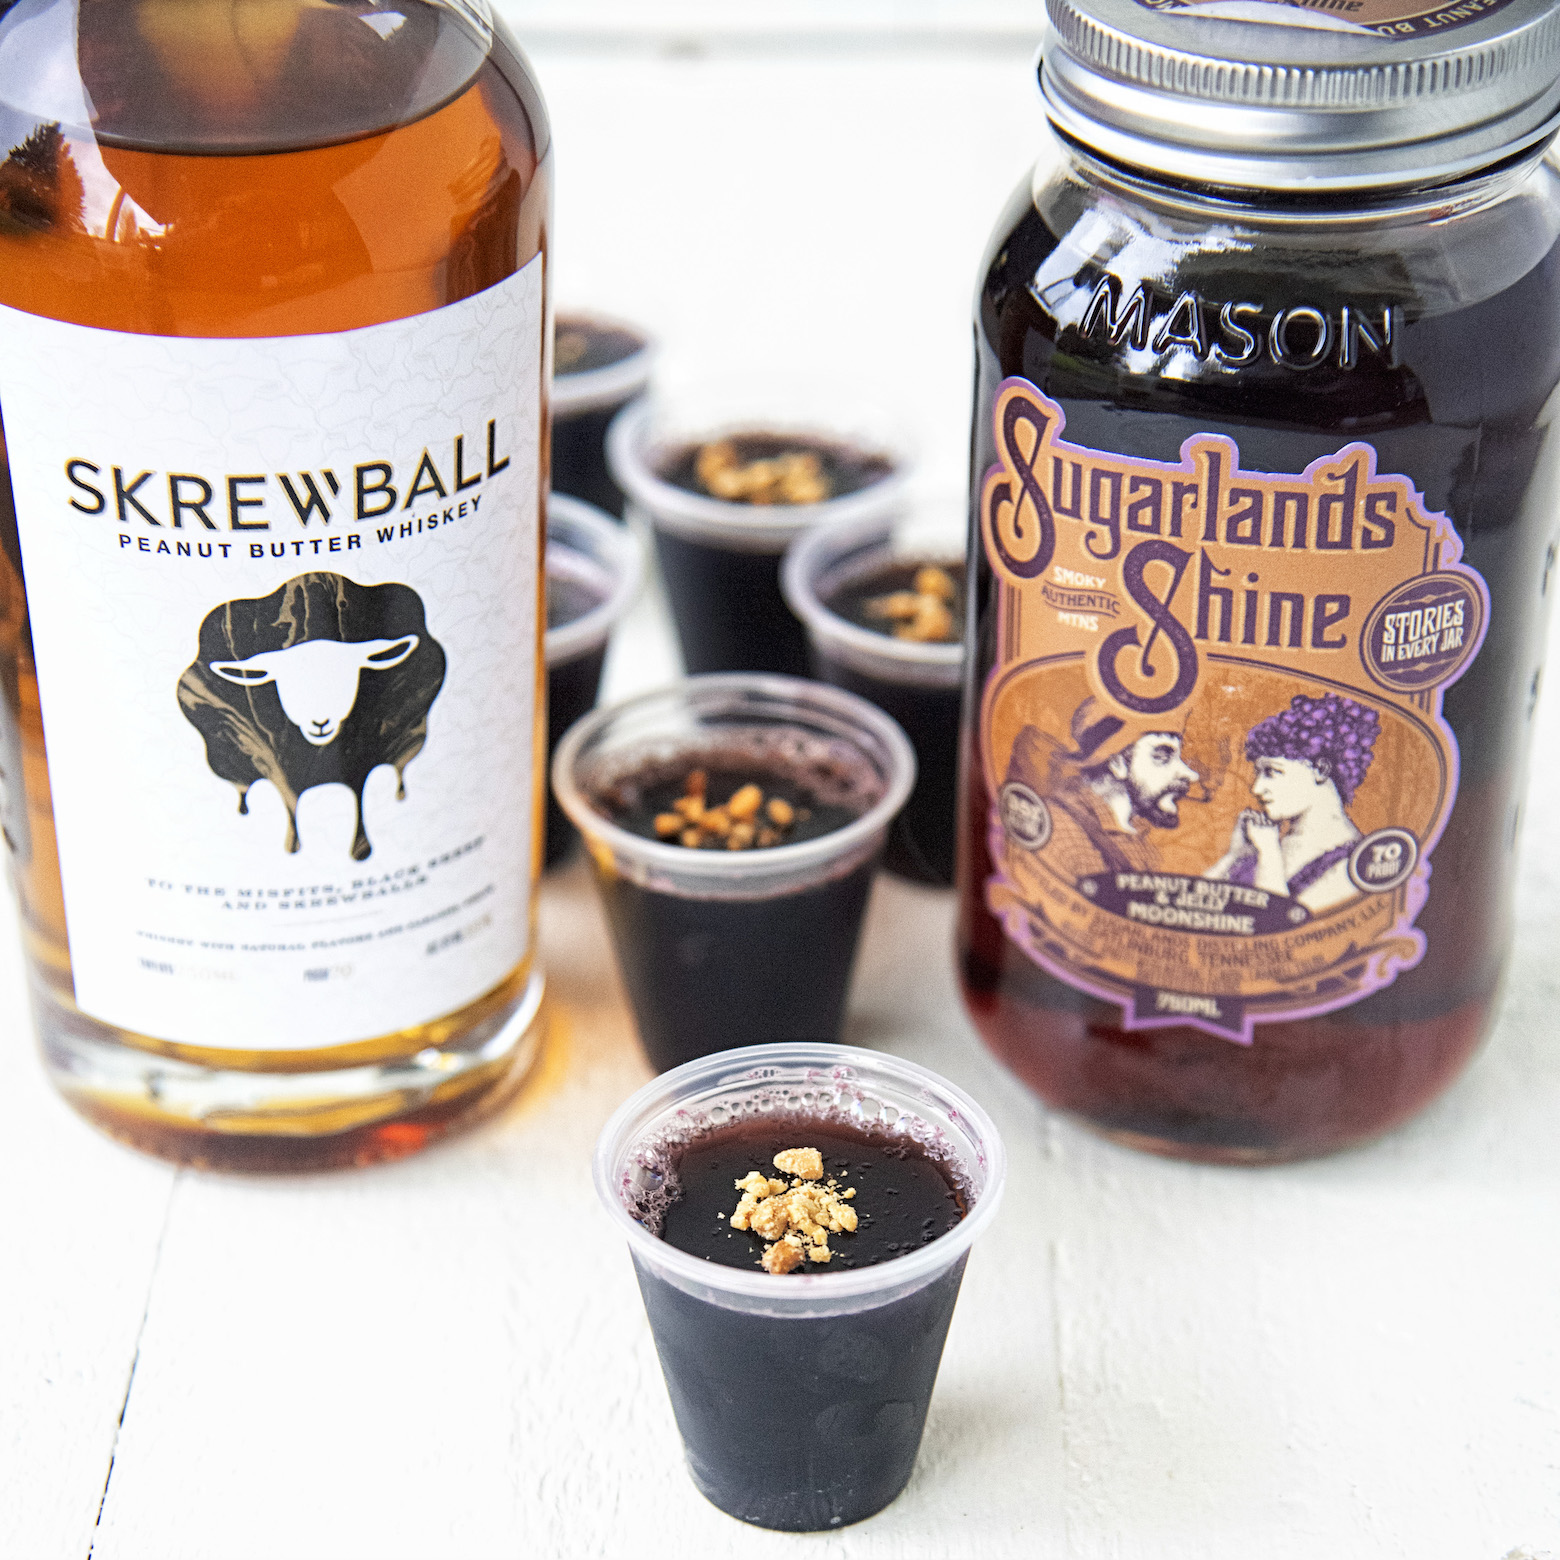 Peanut Butter Grape Jelly Jello Shots with Peanut Butter and Jelly Moonshine bottle on one side and Skrewball Peanut Butter Whiskey on the other side of the jello shots. 